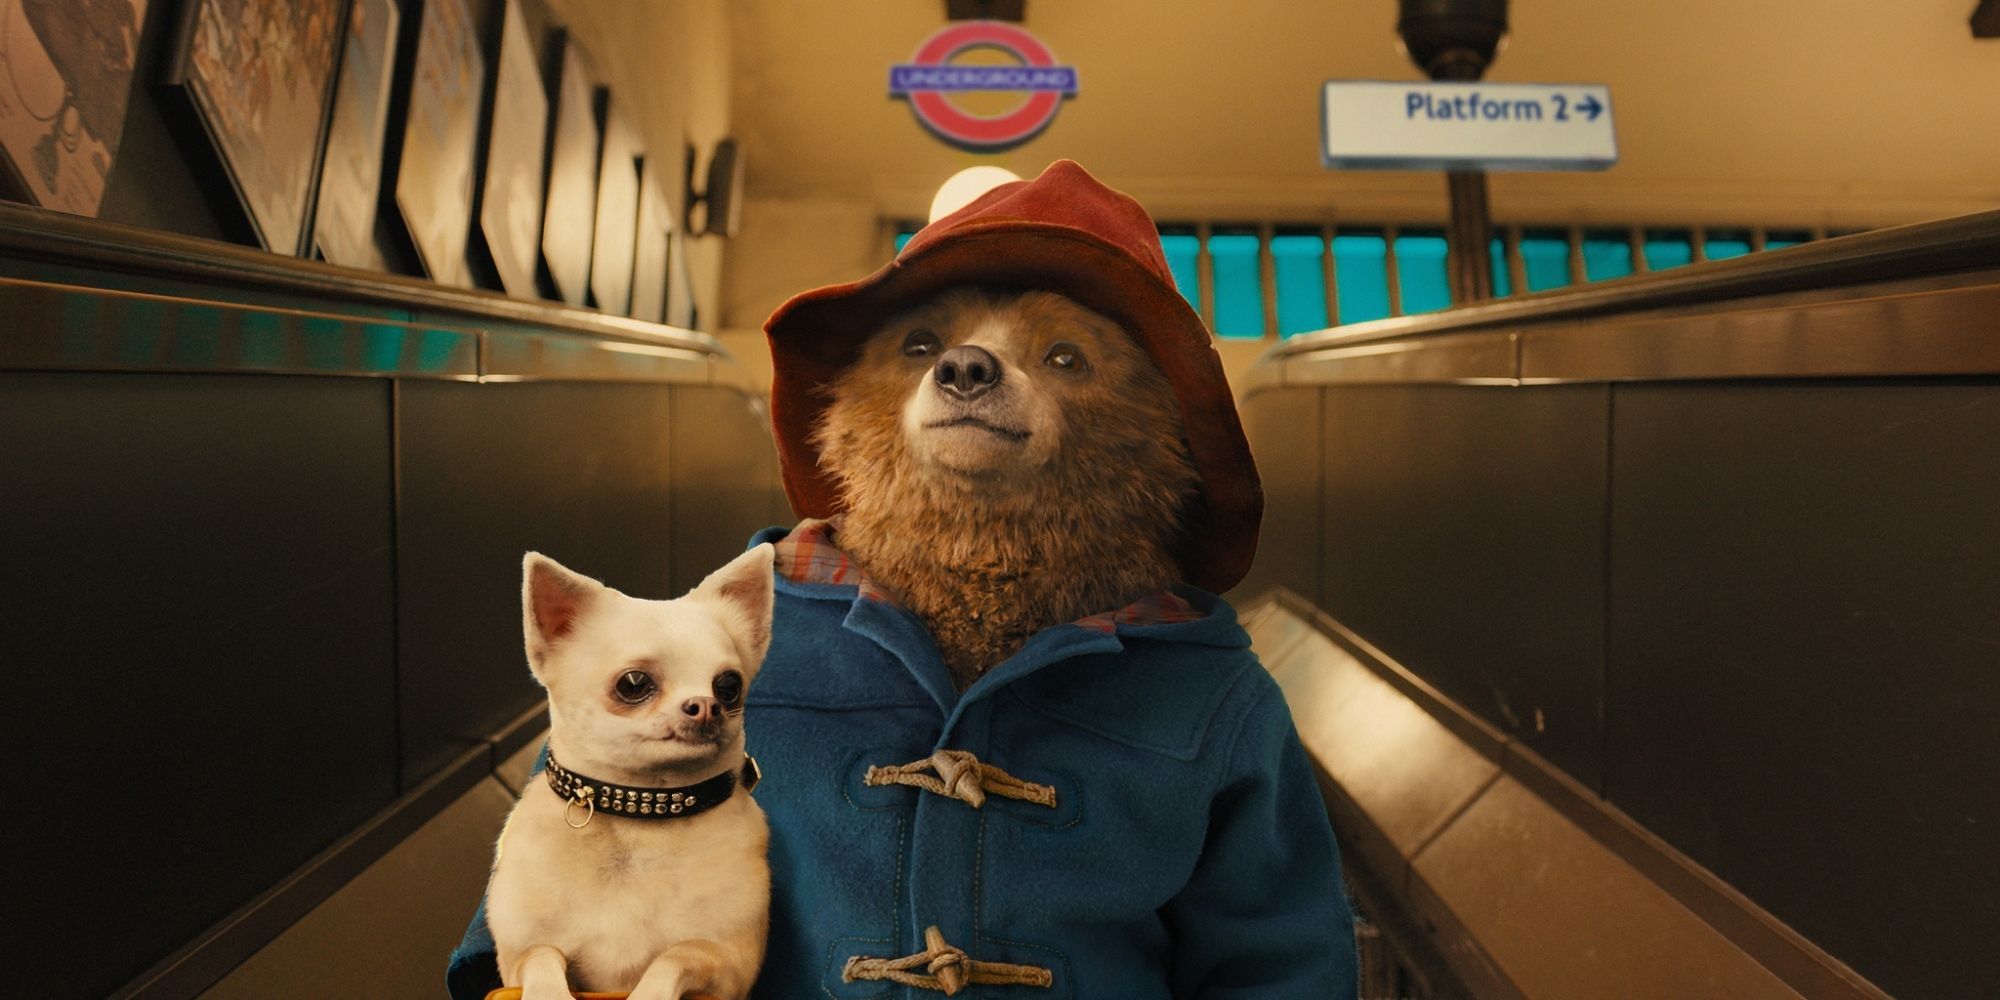 Official image from the Paddington (2014).